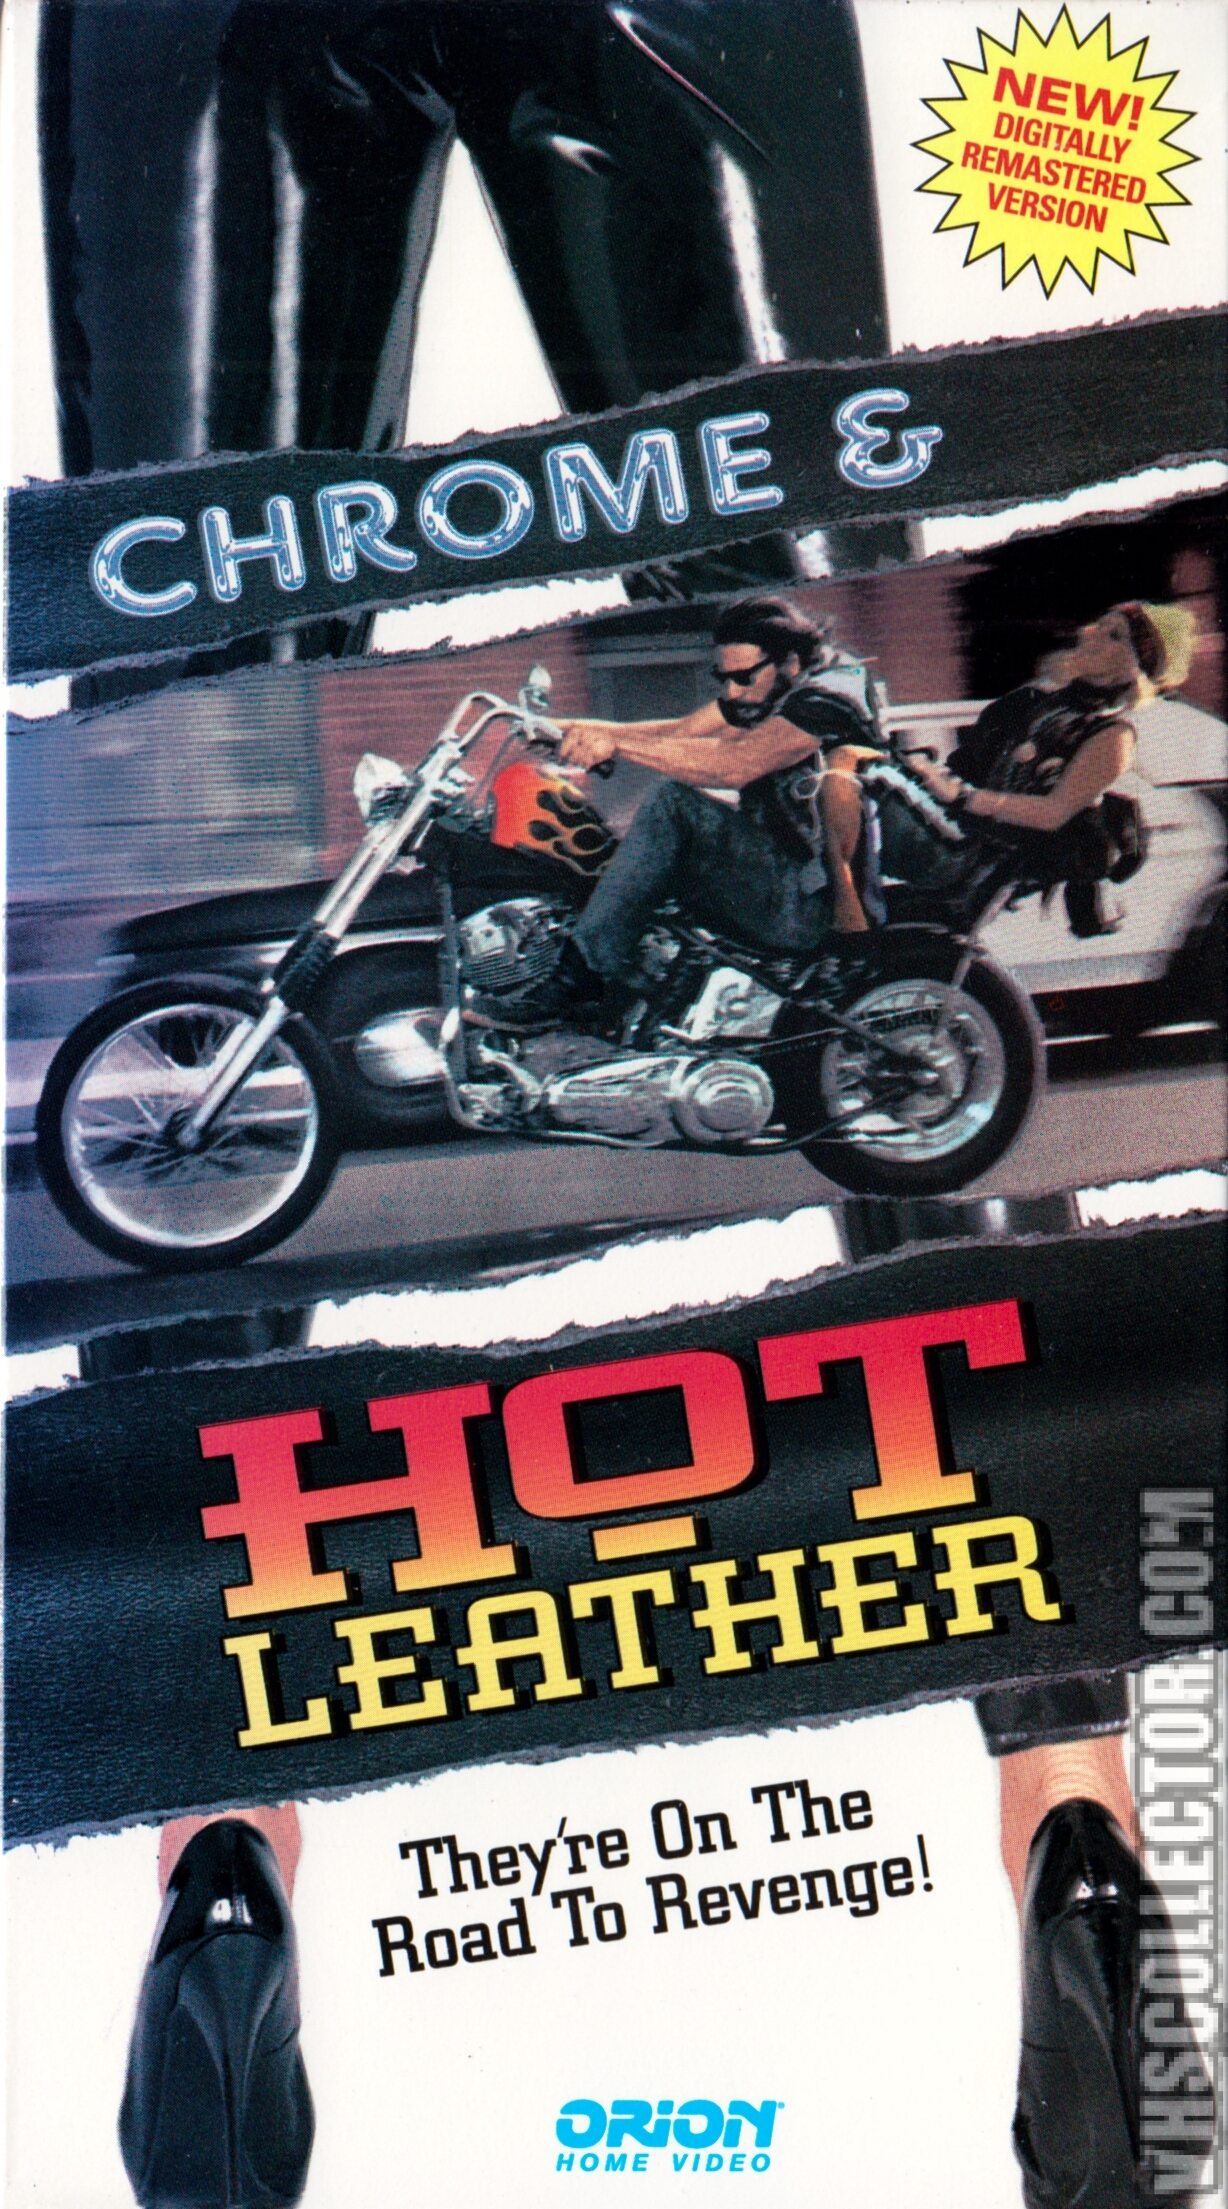 Chrome & Hot Leather | VHSCollector.com